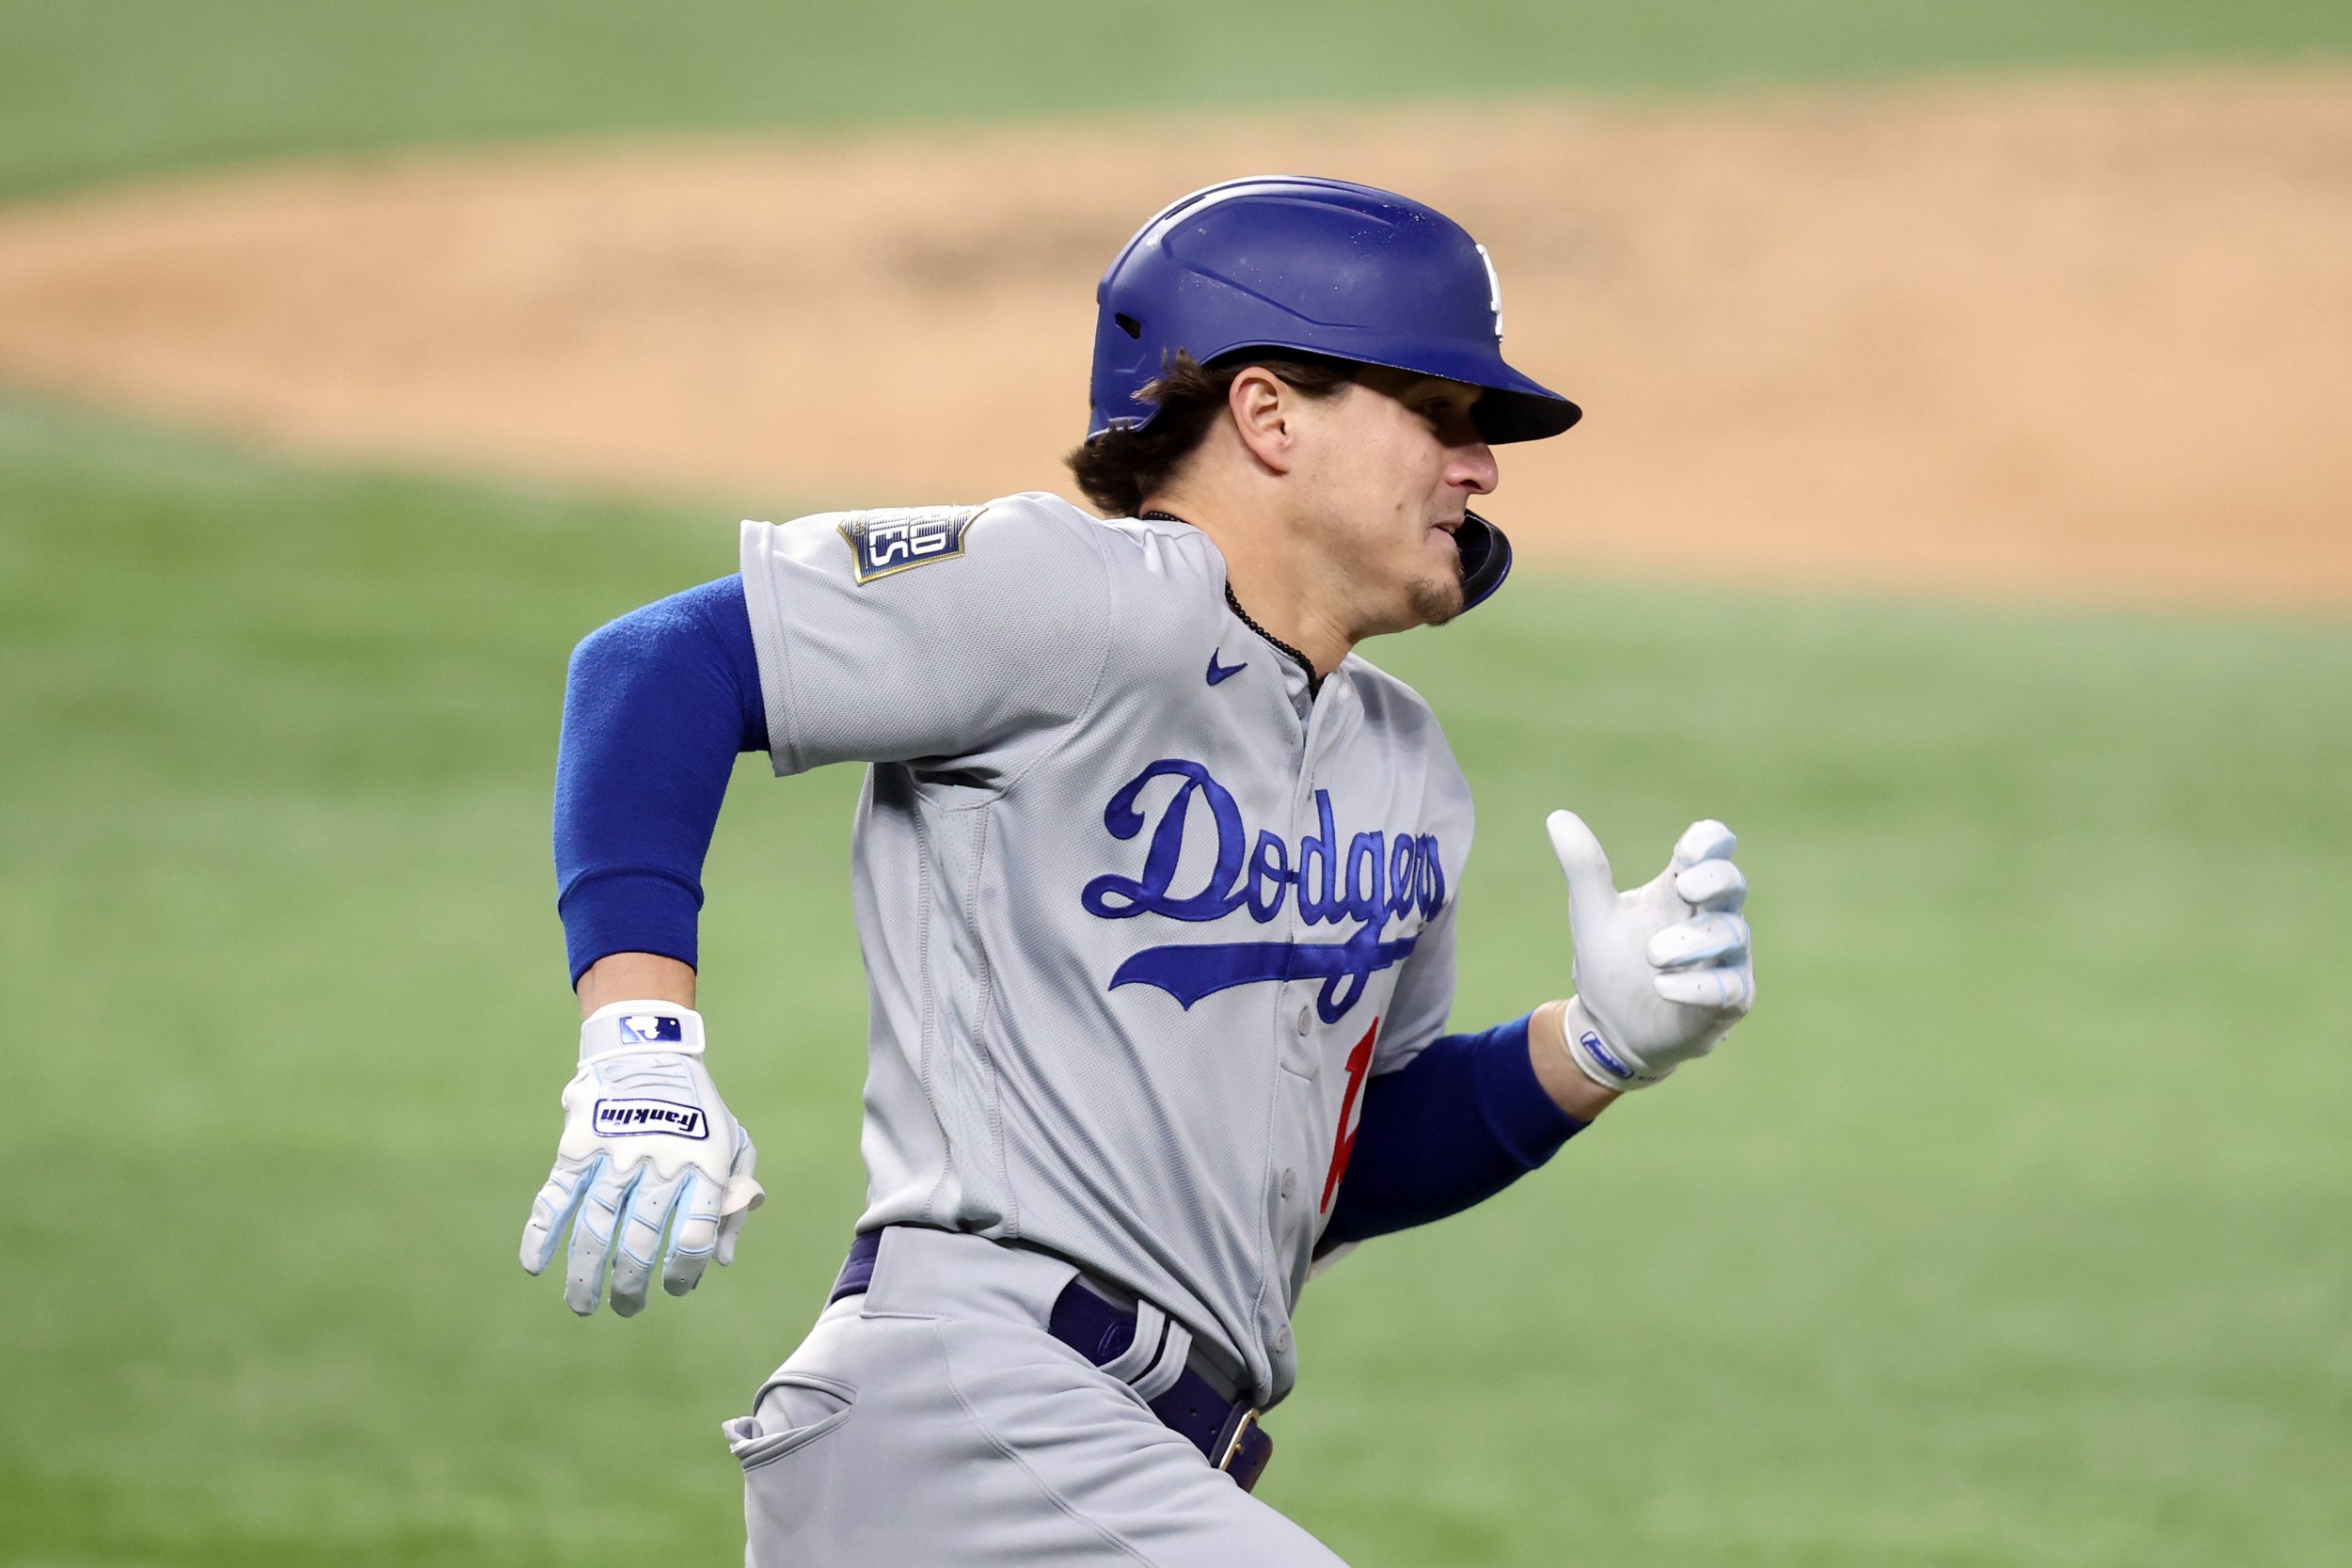 Mlb Trade Rumors Red Sox Exploring Future With Enrique Hernandez At Second Base Report Says